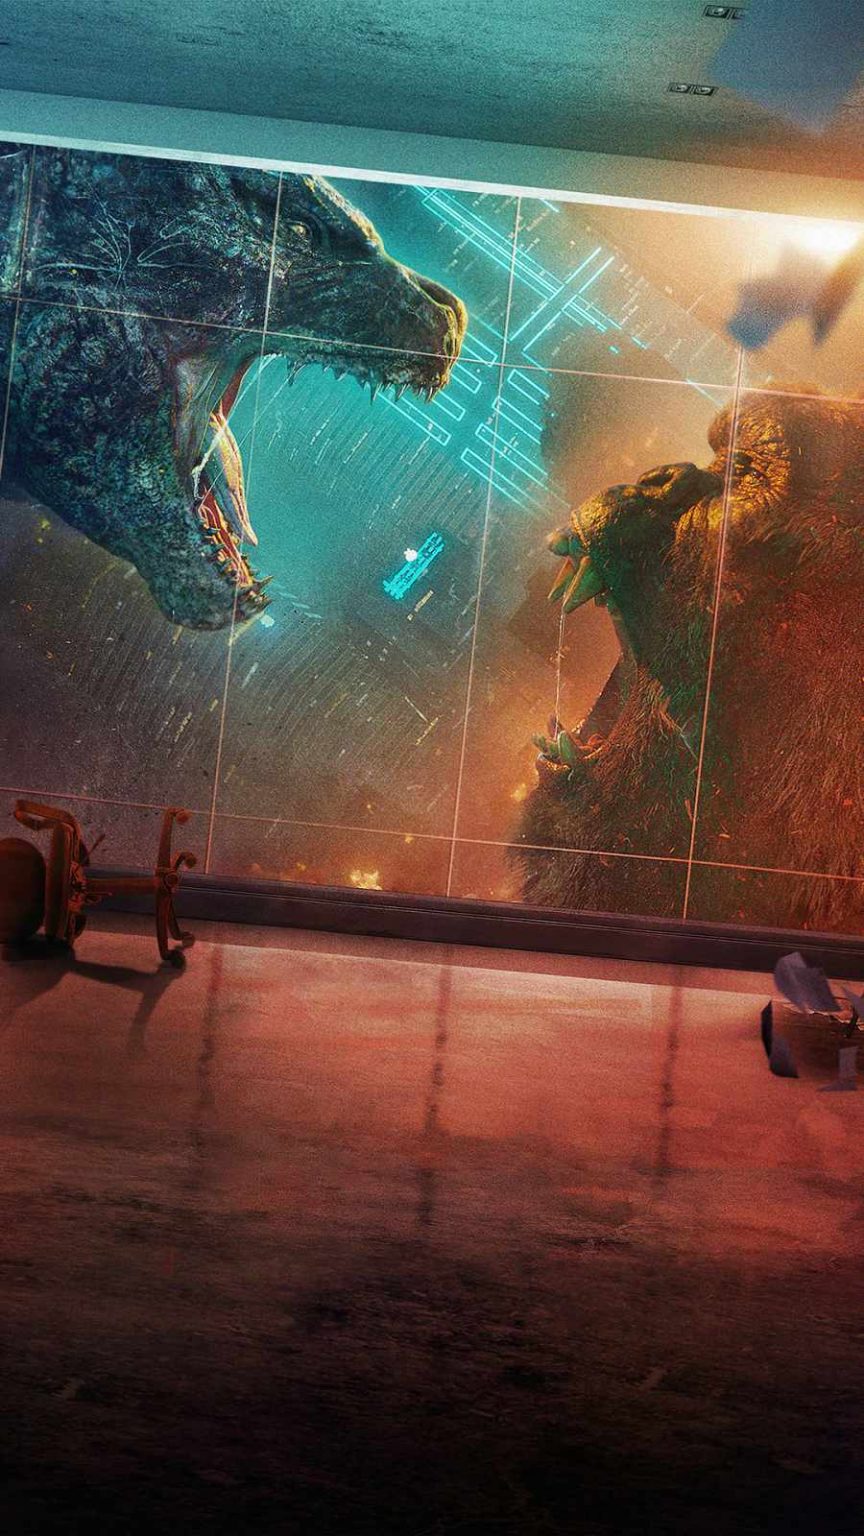 Godzilla Vs Kong Movie Poster - IPhone Wallpapers : iPhone Wallpapers